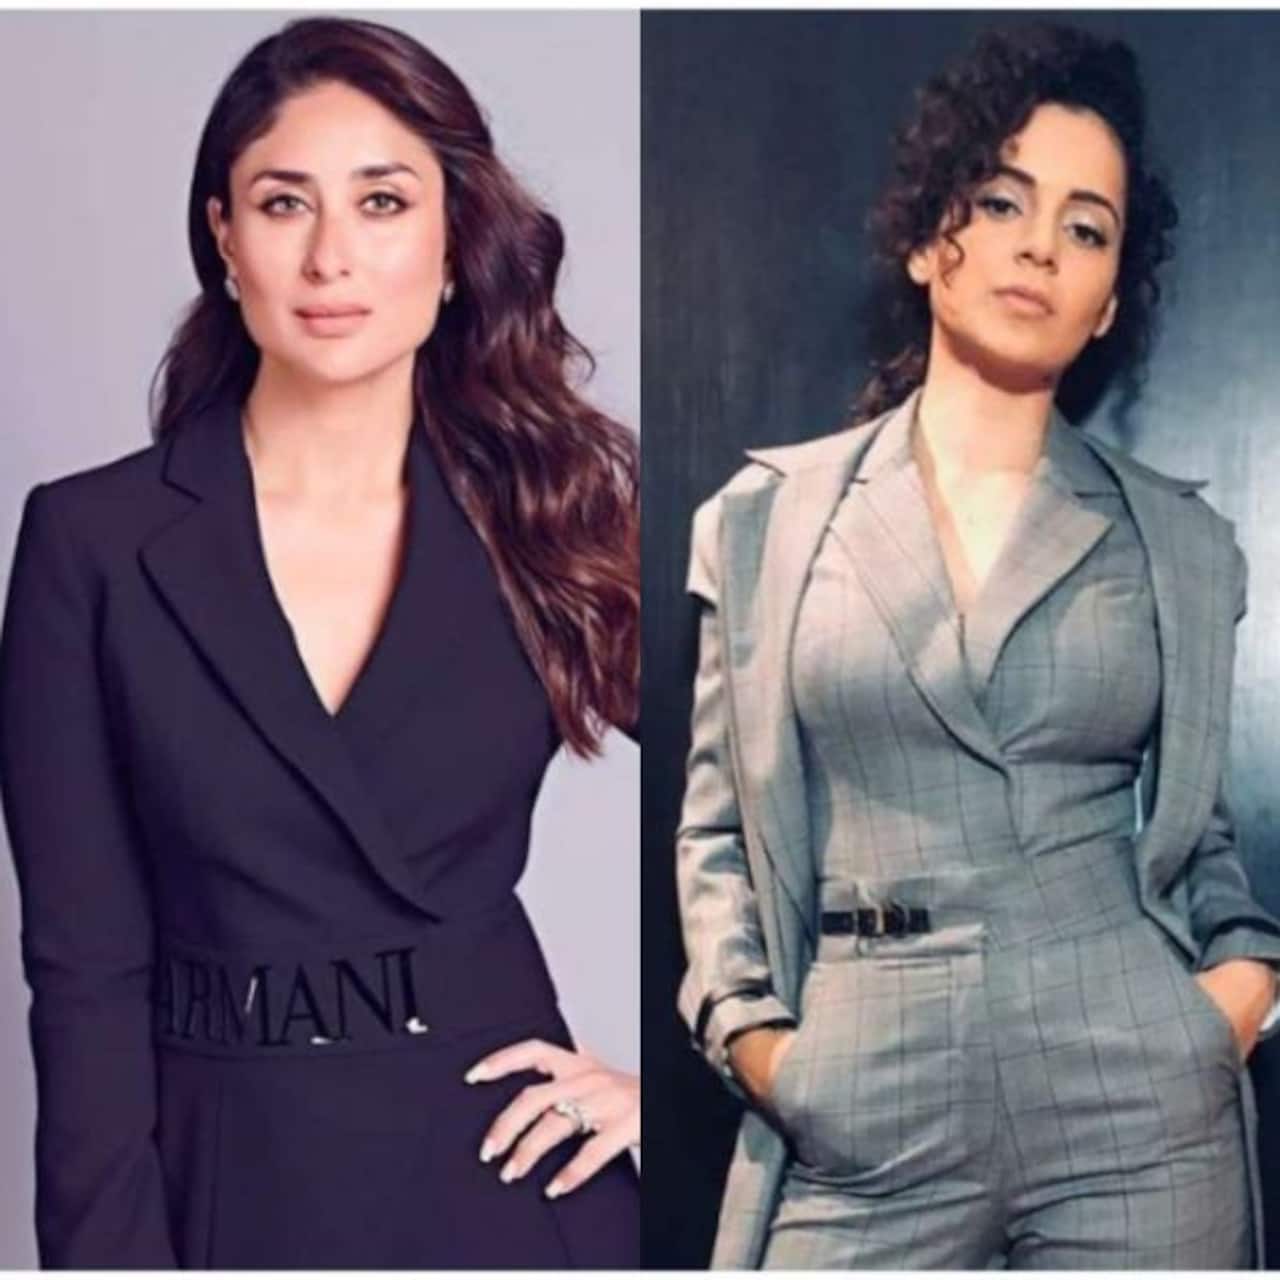 Kareena Kapoor reportedly charges Rs. 12 crore to play Sita and netizens lose their s*it; demand boycott and replacement by Kangana Ranaut – read tweets